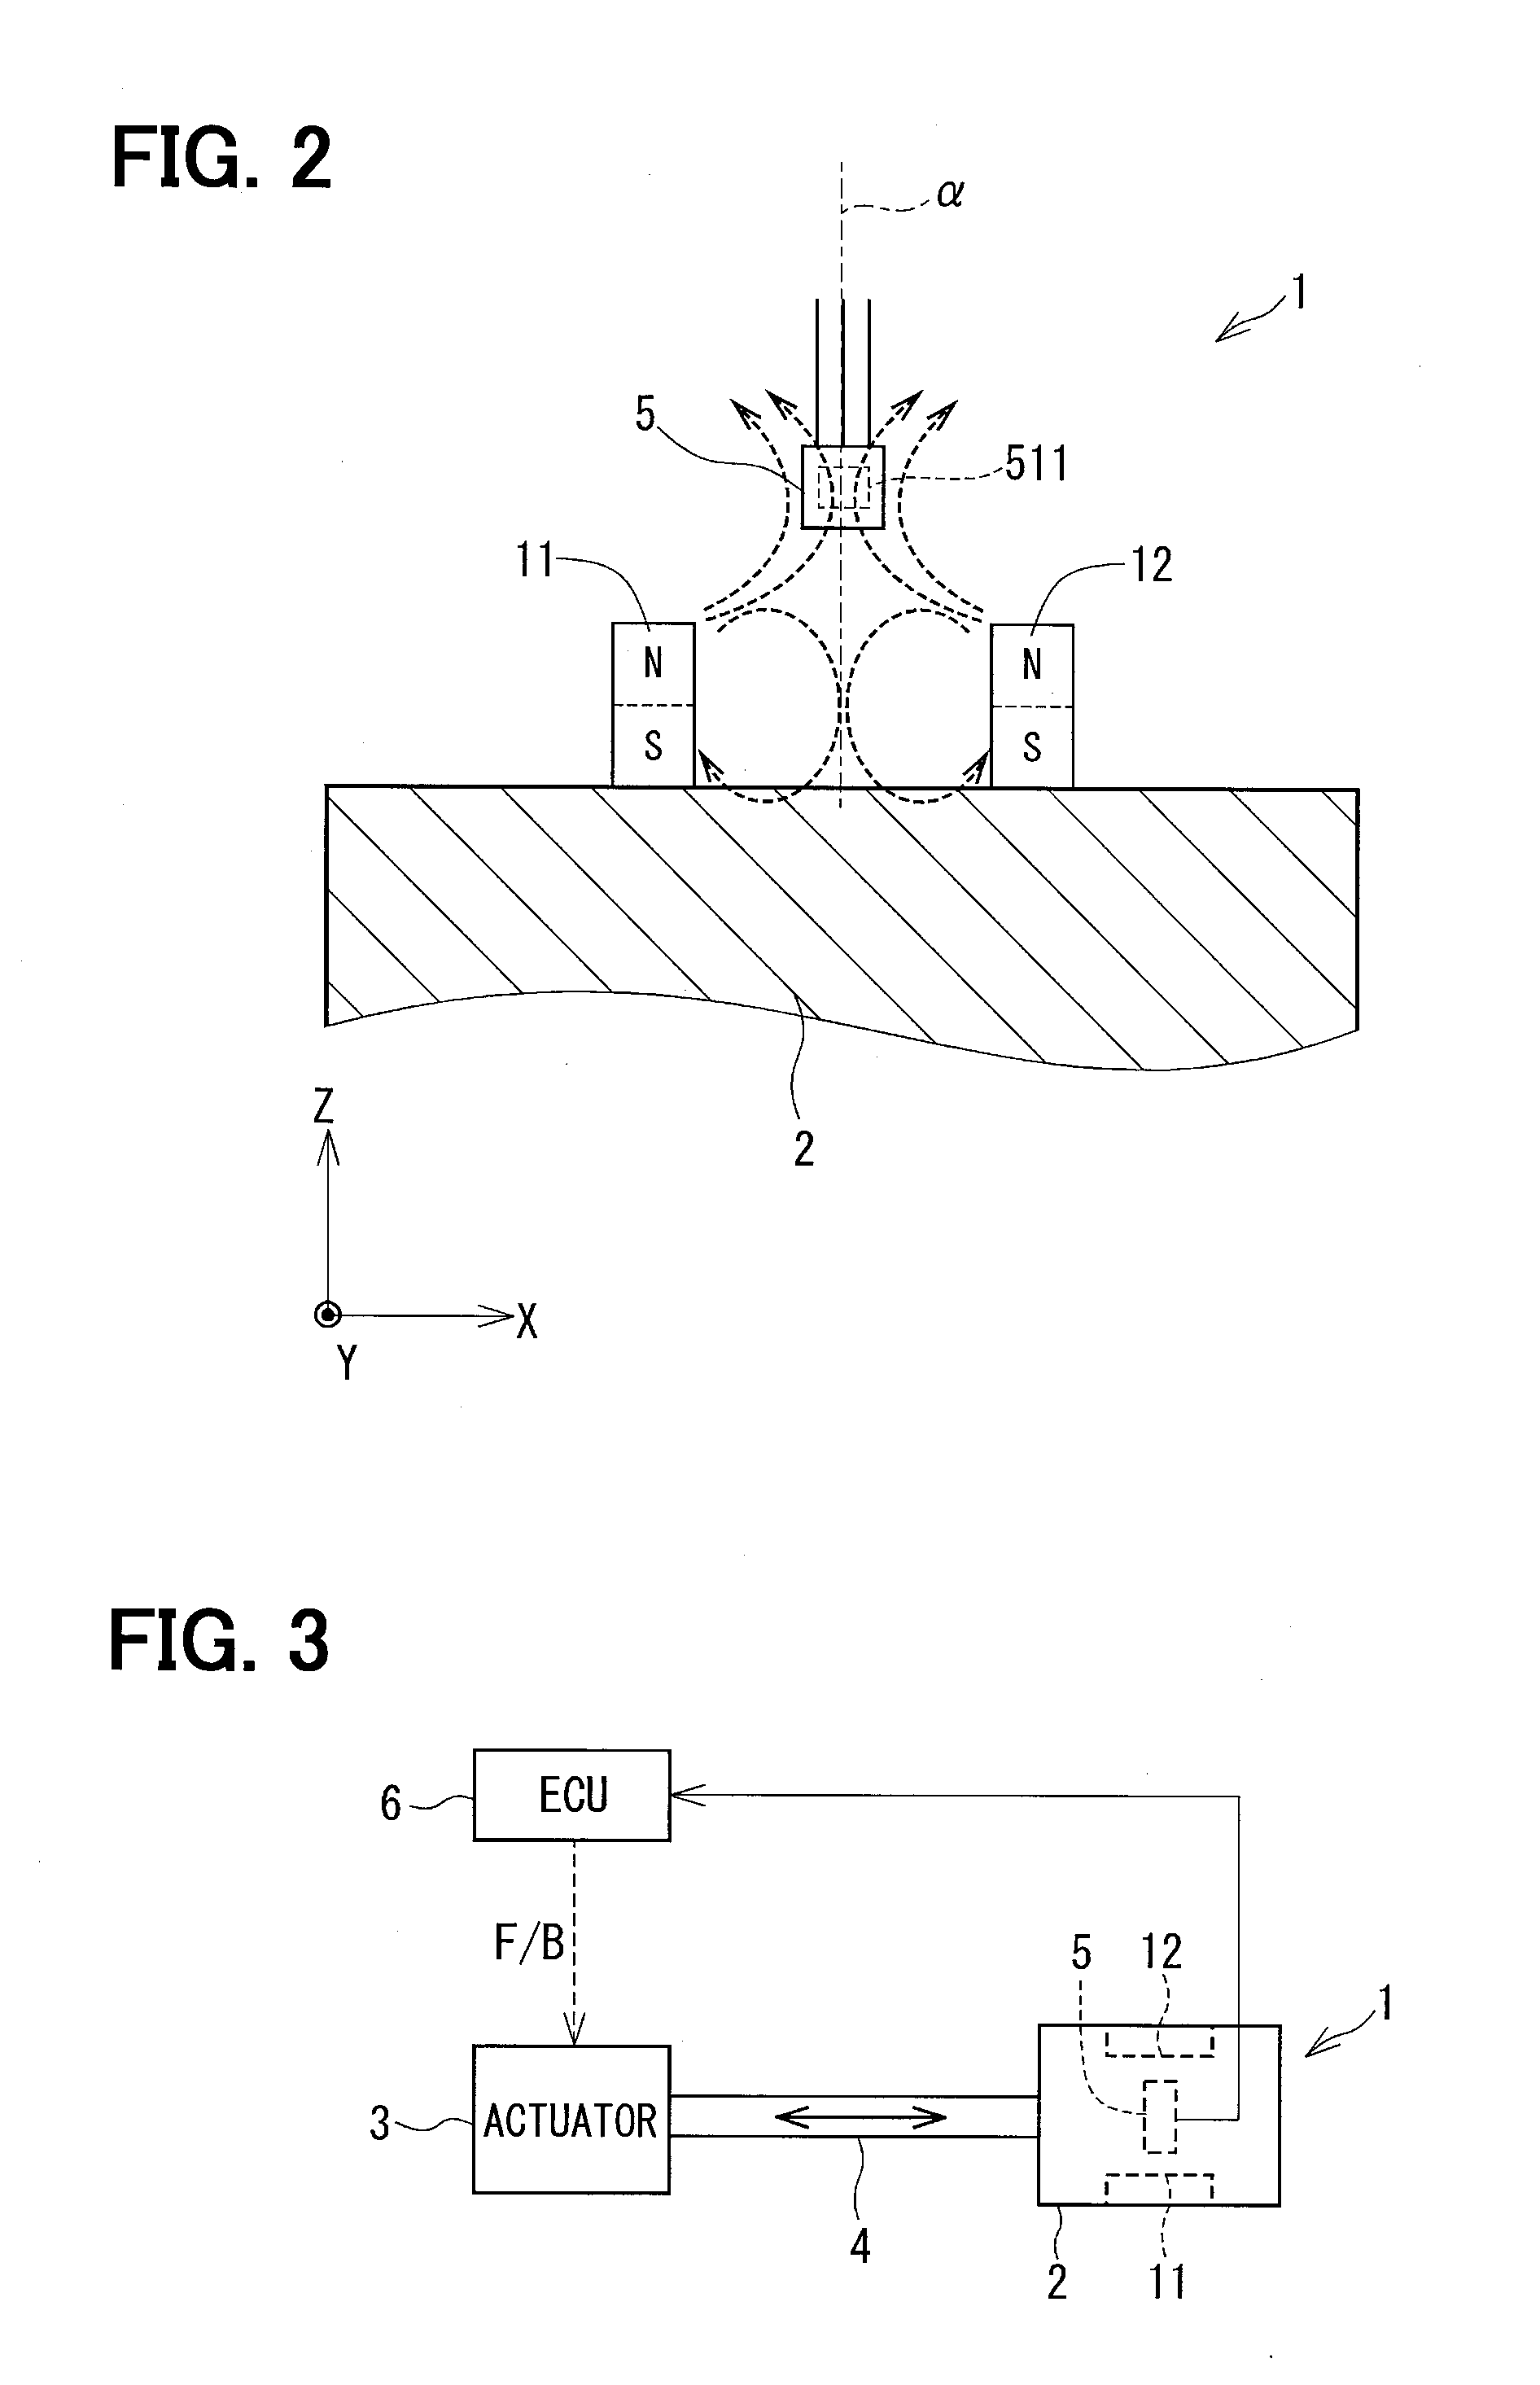 Position detecting device